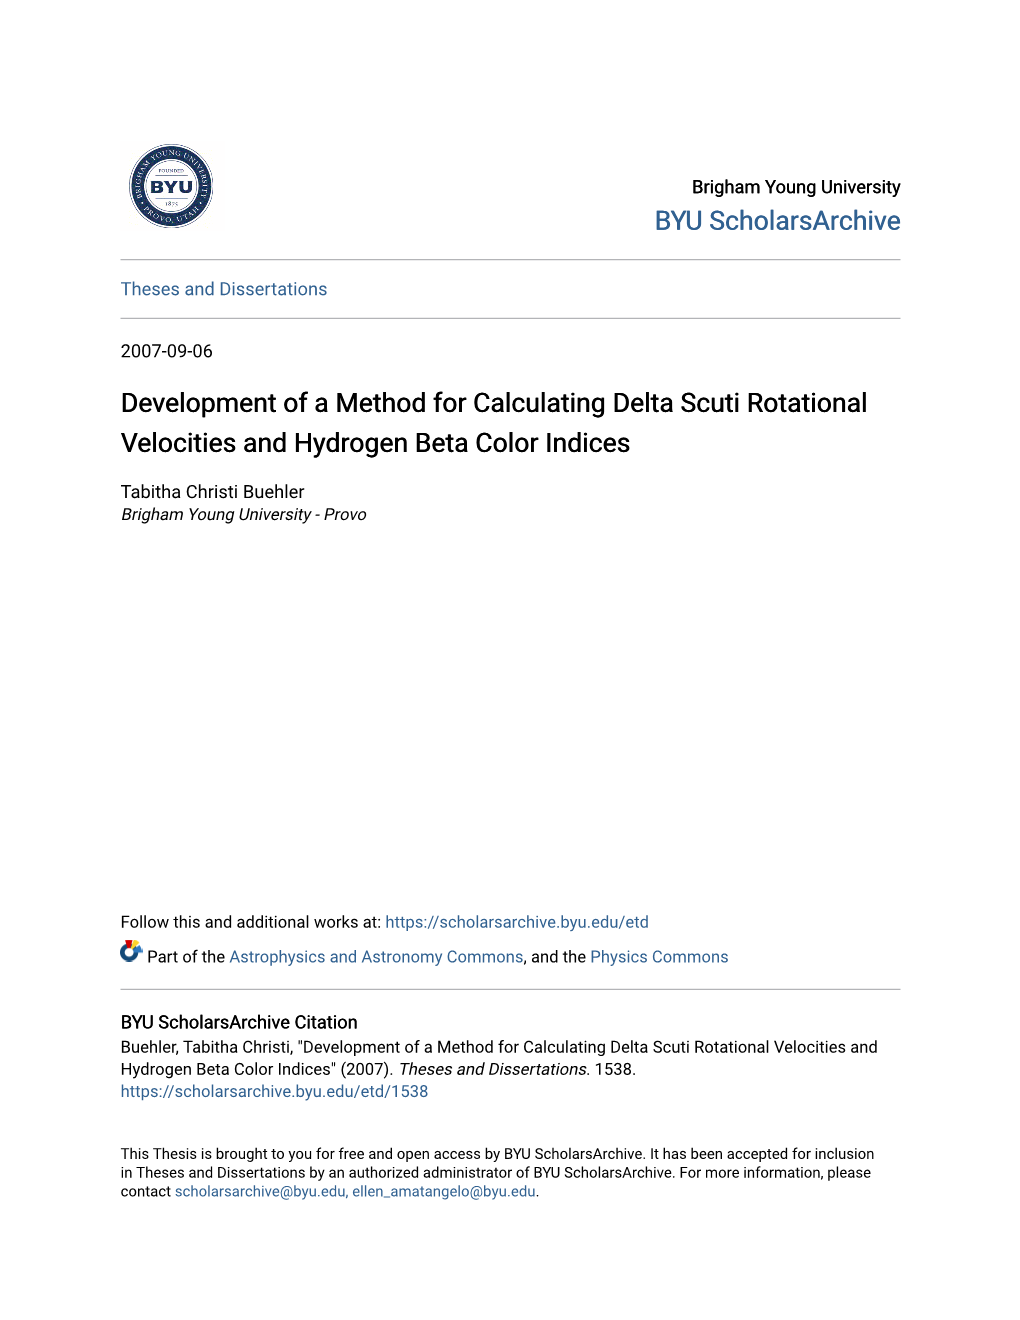 Development of a Method for Calculating Delta Scuti Rotational Velocities and Hydrogen Beta Color Indices